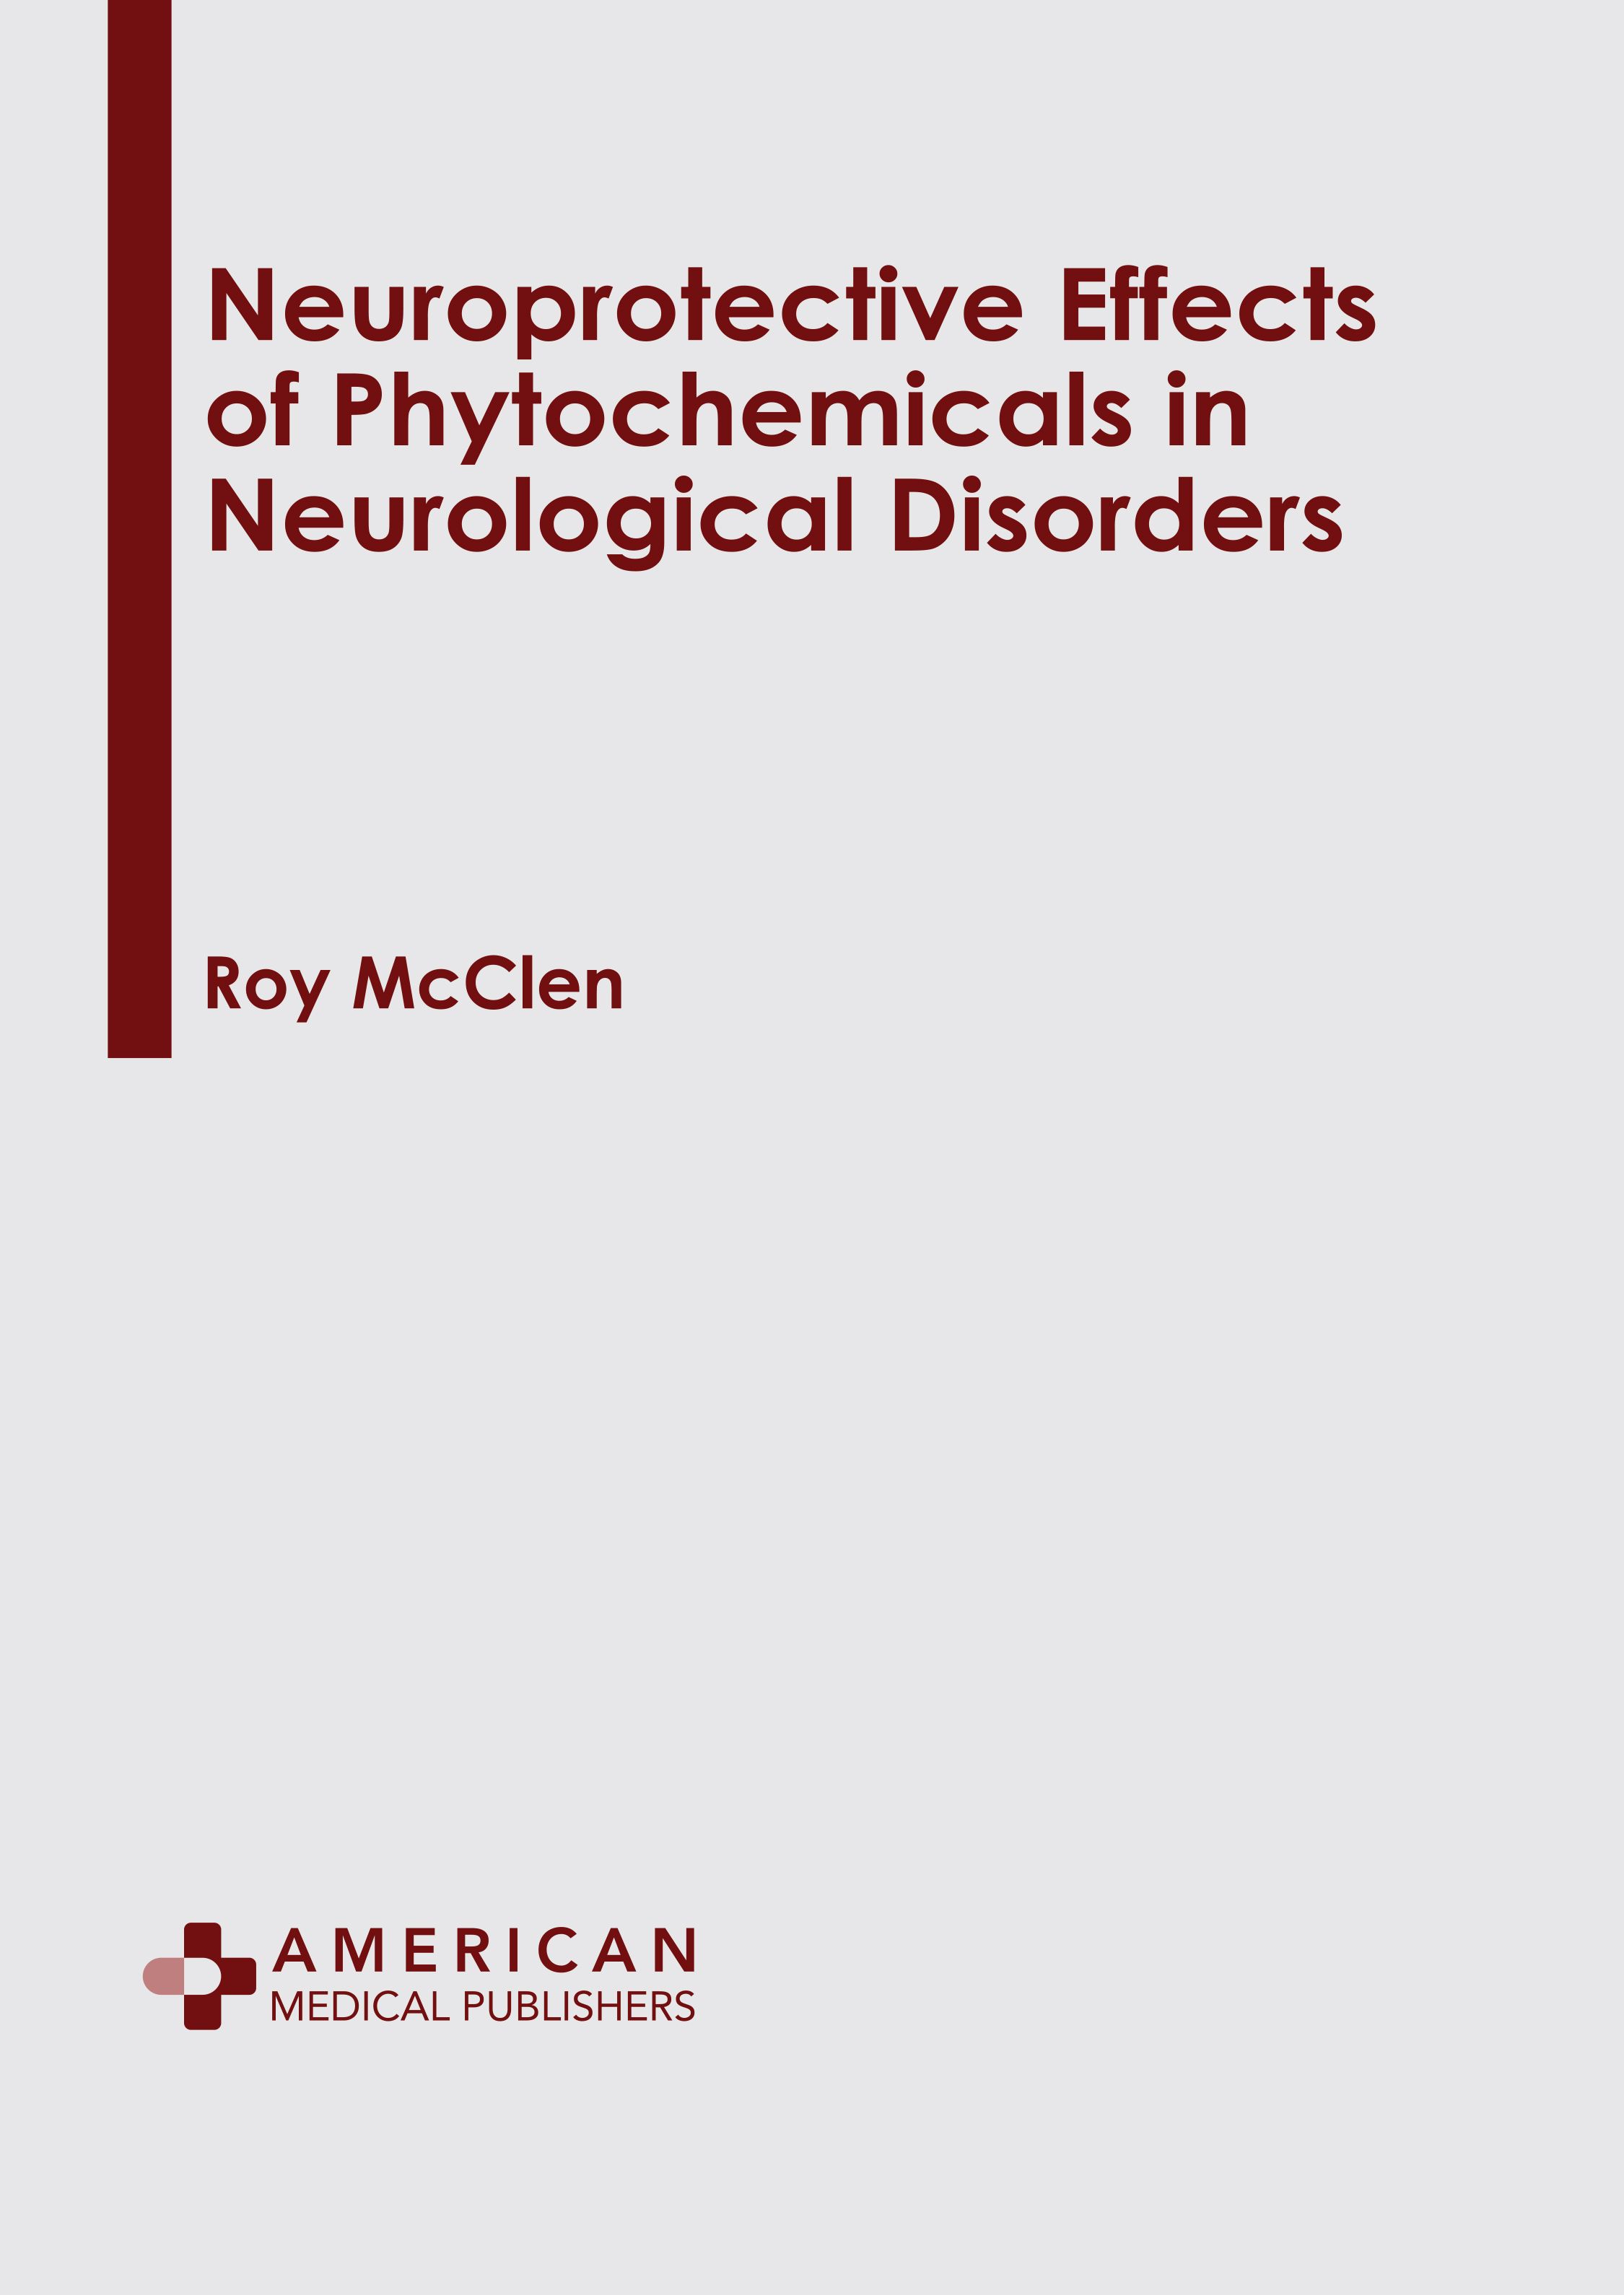 

exclusive-publishers/american-medical-publishers/neuroprotective-effects-of-phytochemicals-in-neurological-disorders-9781639277476